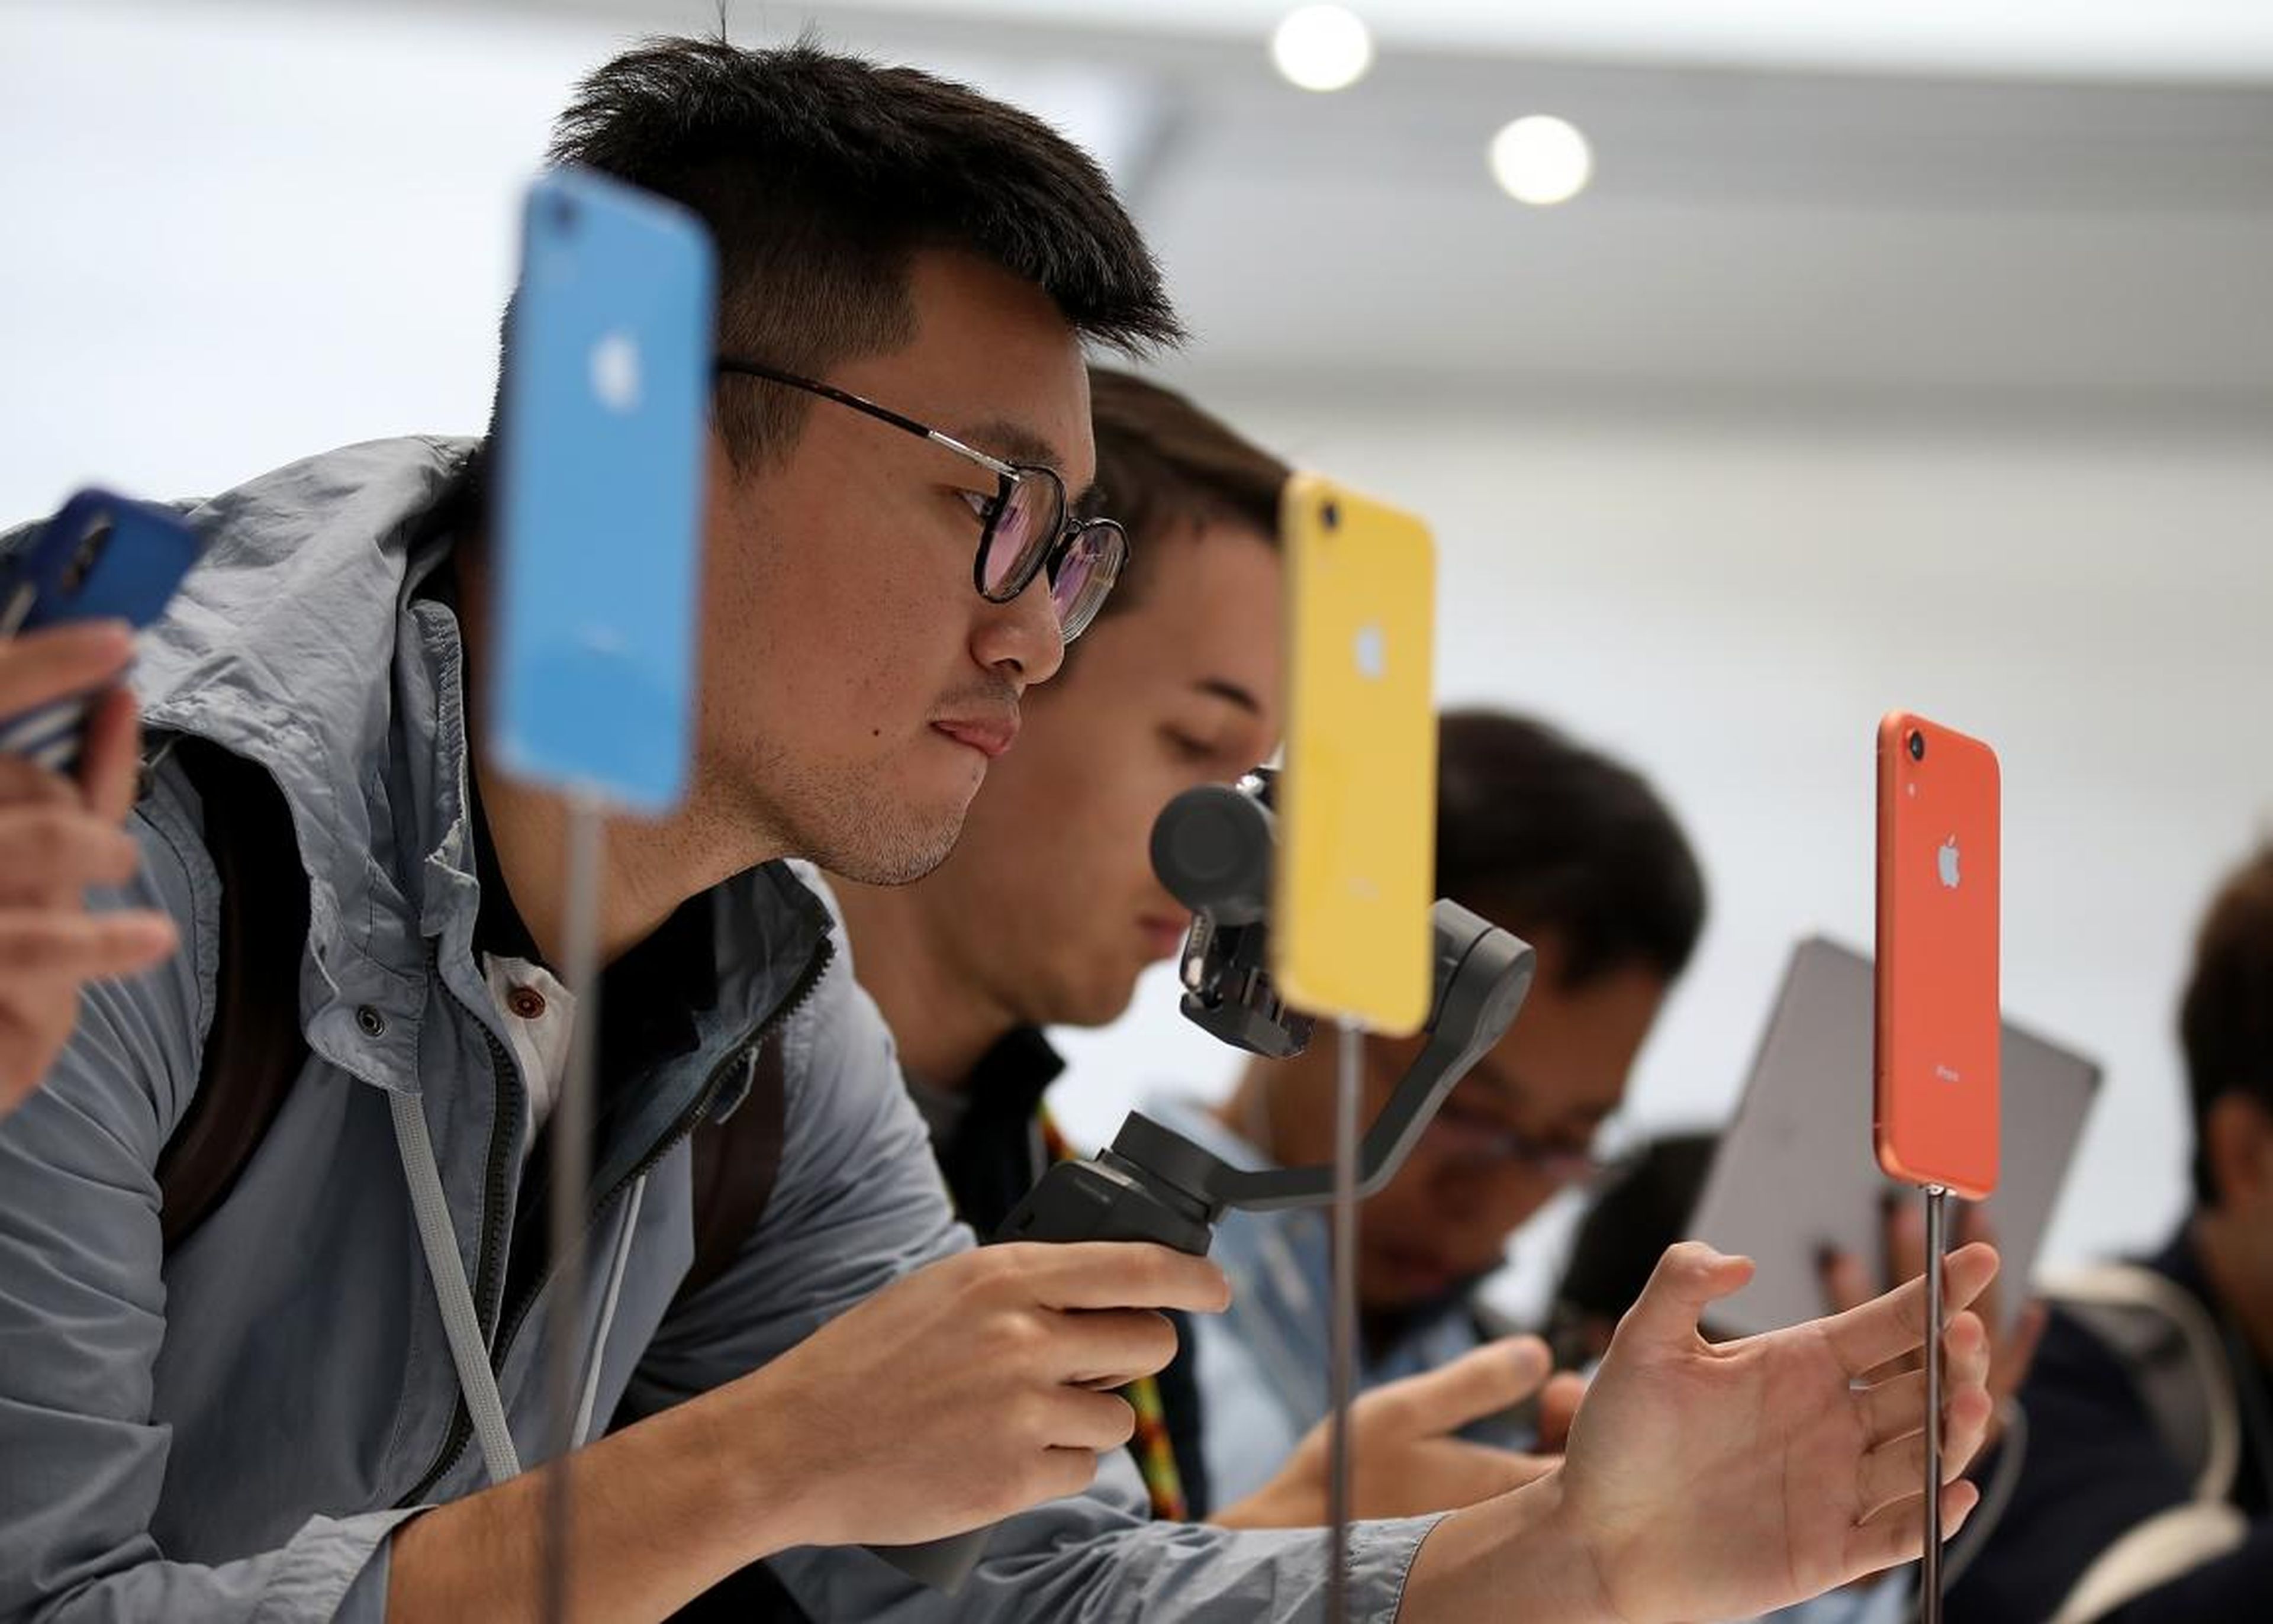 Visitors inspect the iPhone XR.